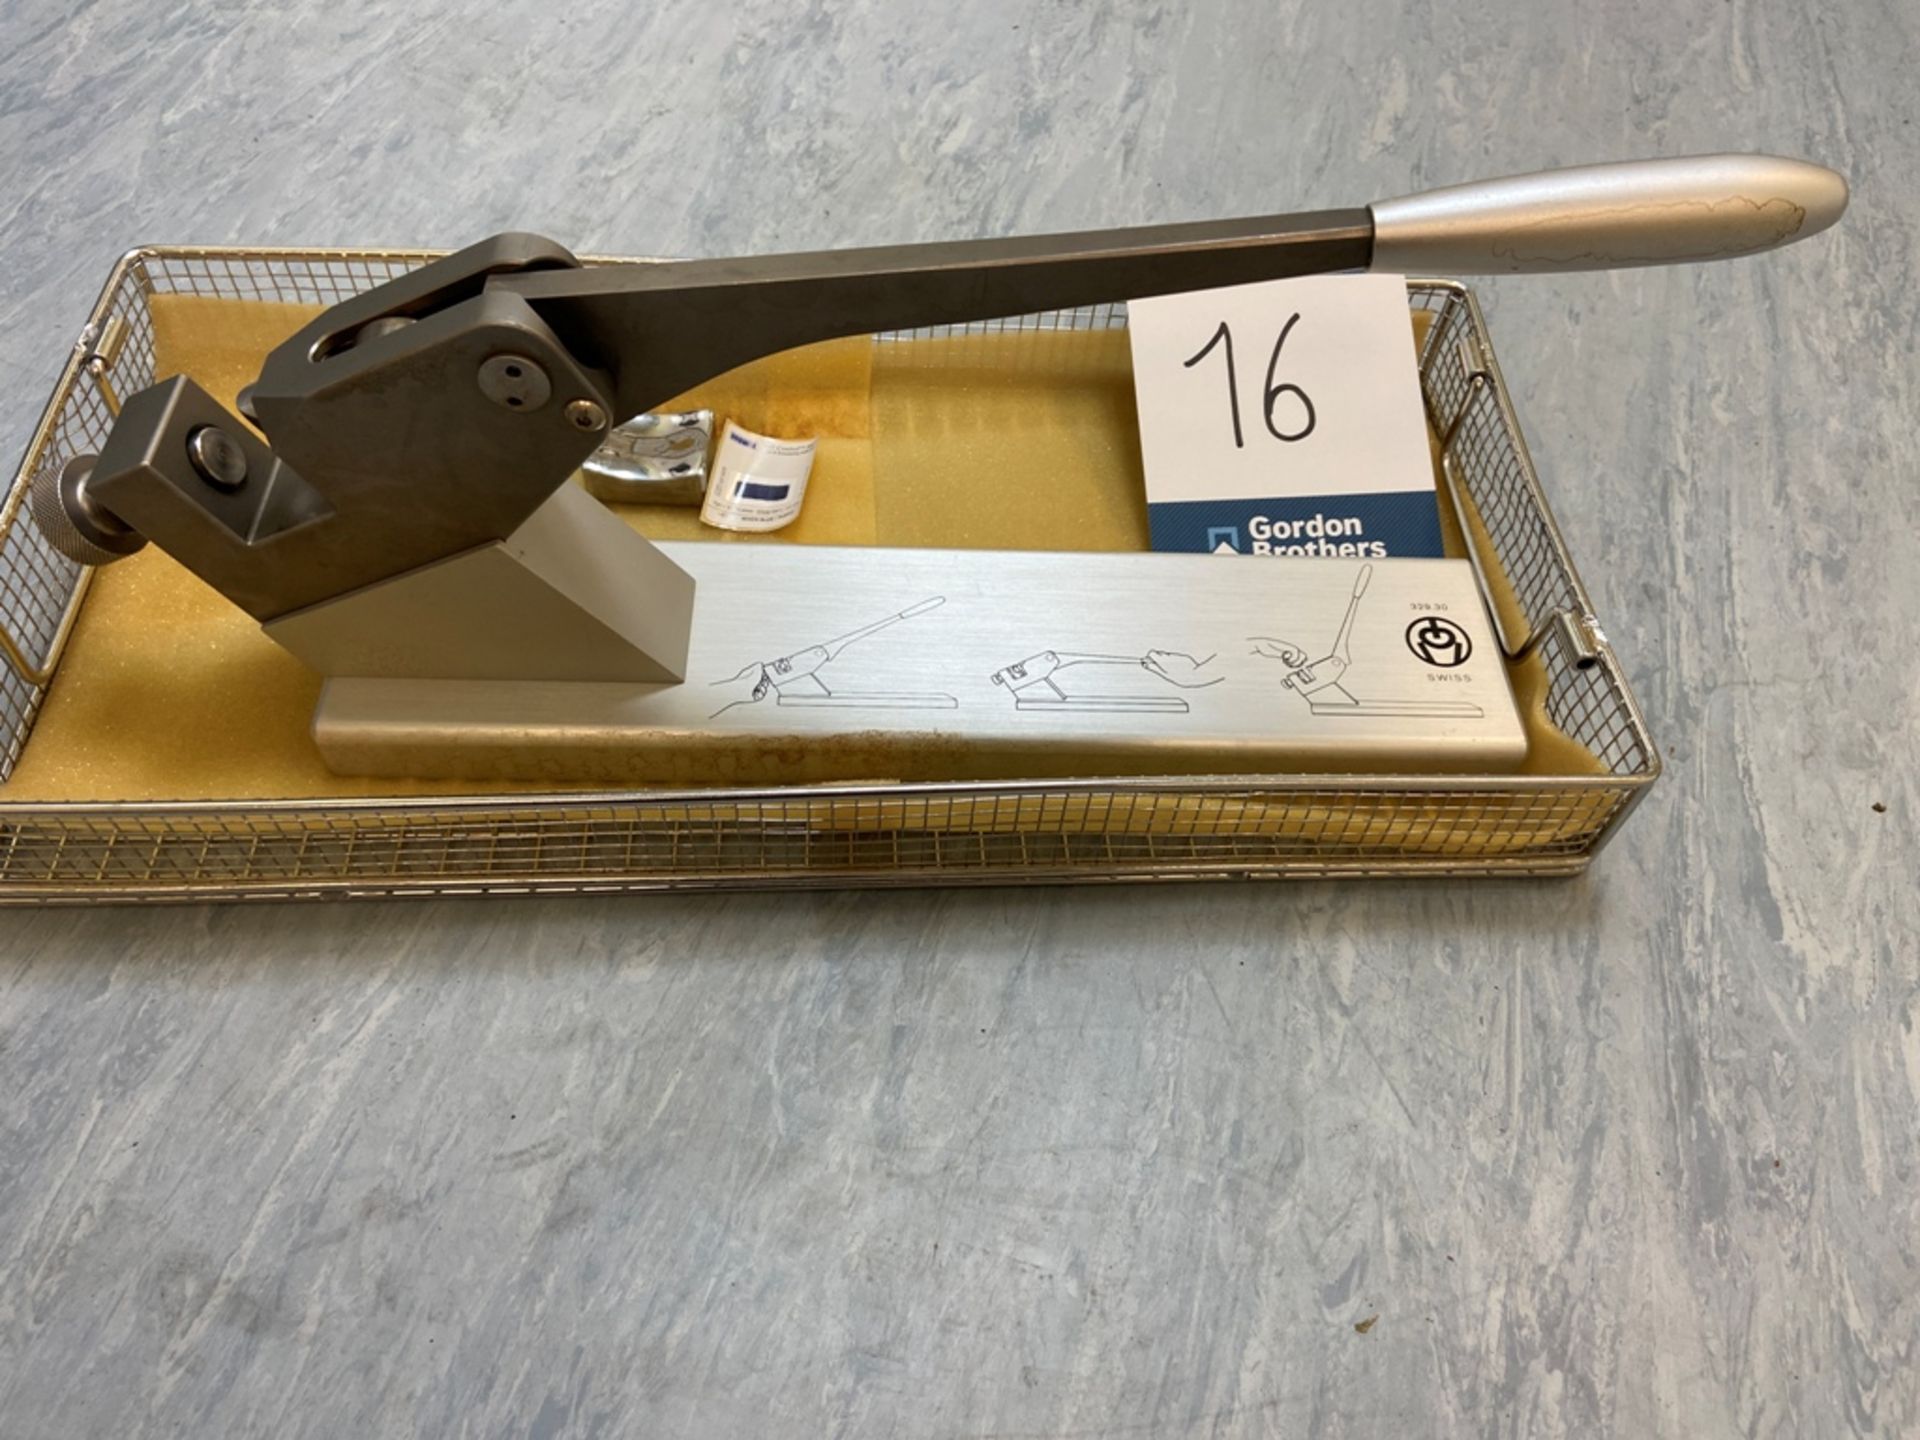 Swiss large surgical benders, Ref. 329.30 with sterilisation tray - Image 2 of 2